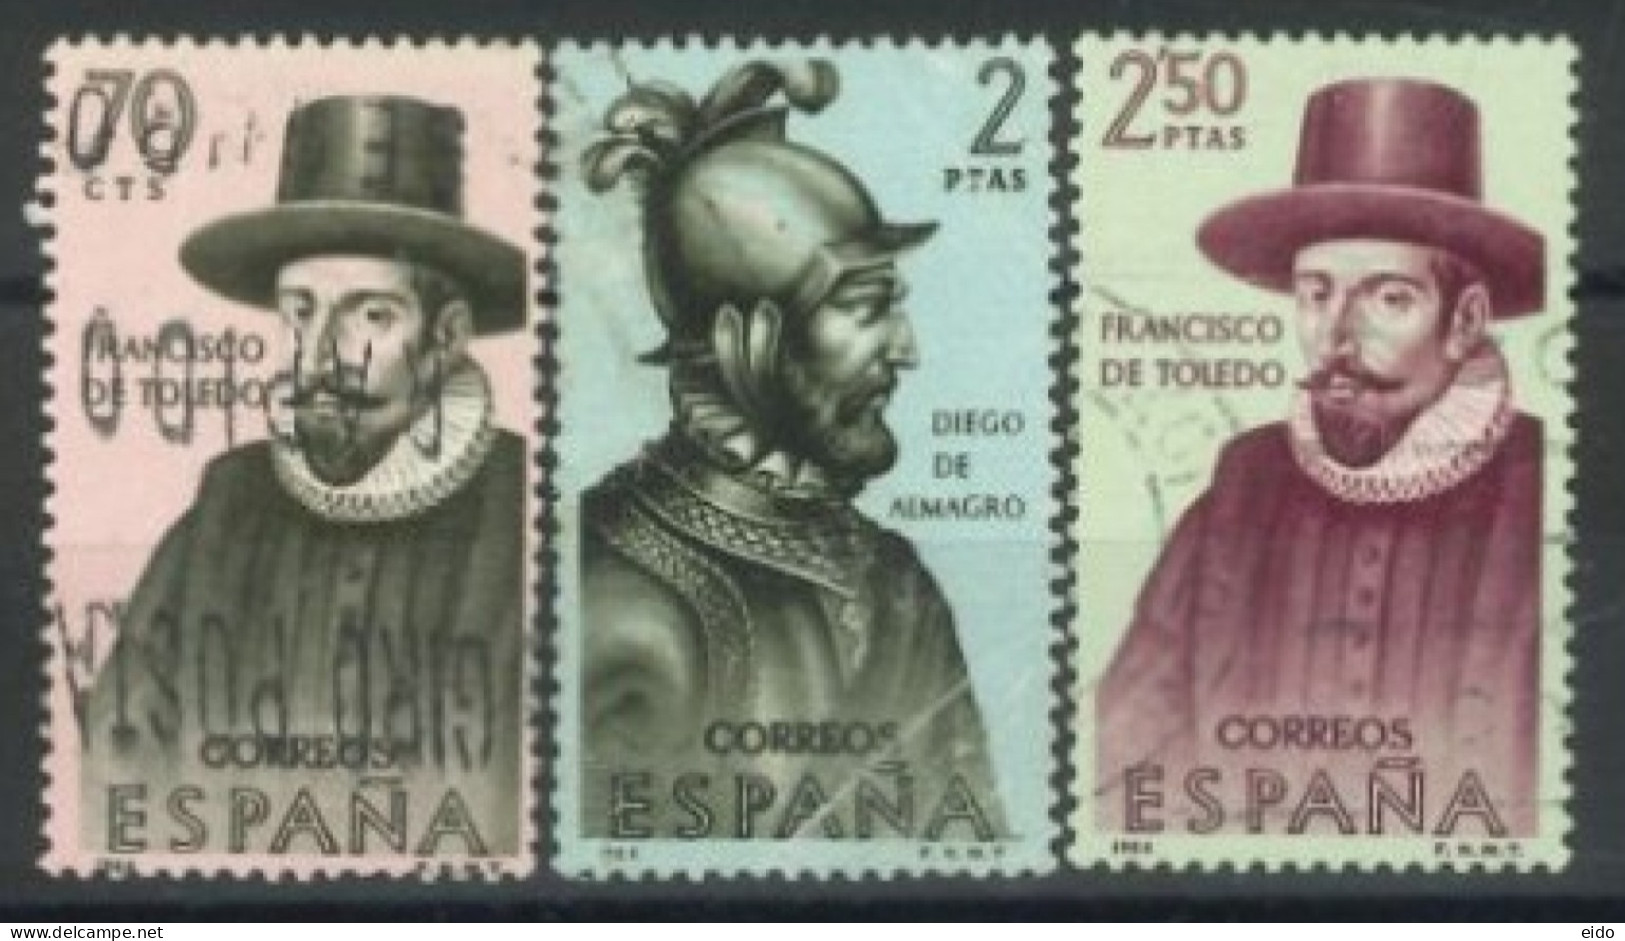 SPAIN, 1964, BUILDERS OF THE NEW WORLD STAMPS SET OF 3, # 1272,1274,& 1276, USED. - Oblitérés